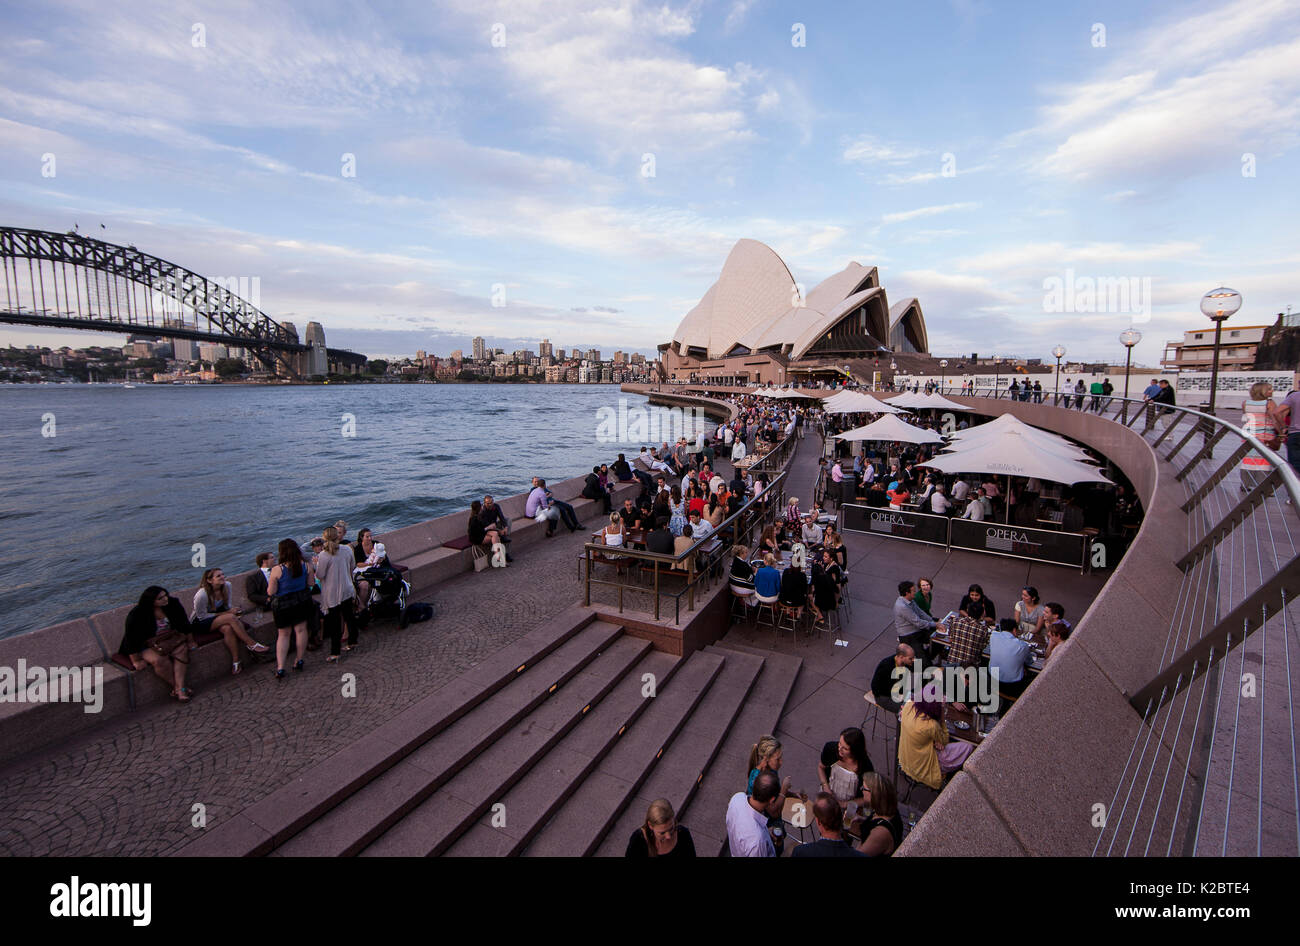 People relaxing in Sydney harbor area, with views of the Harbour Bridge and Opera House, New South Wales, Australia. November 2012. Stock Photo